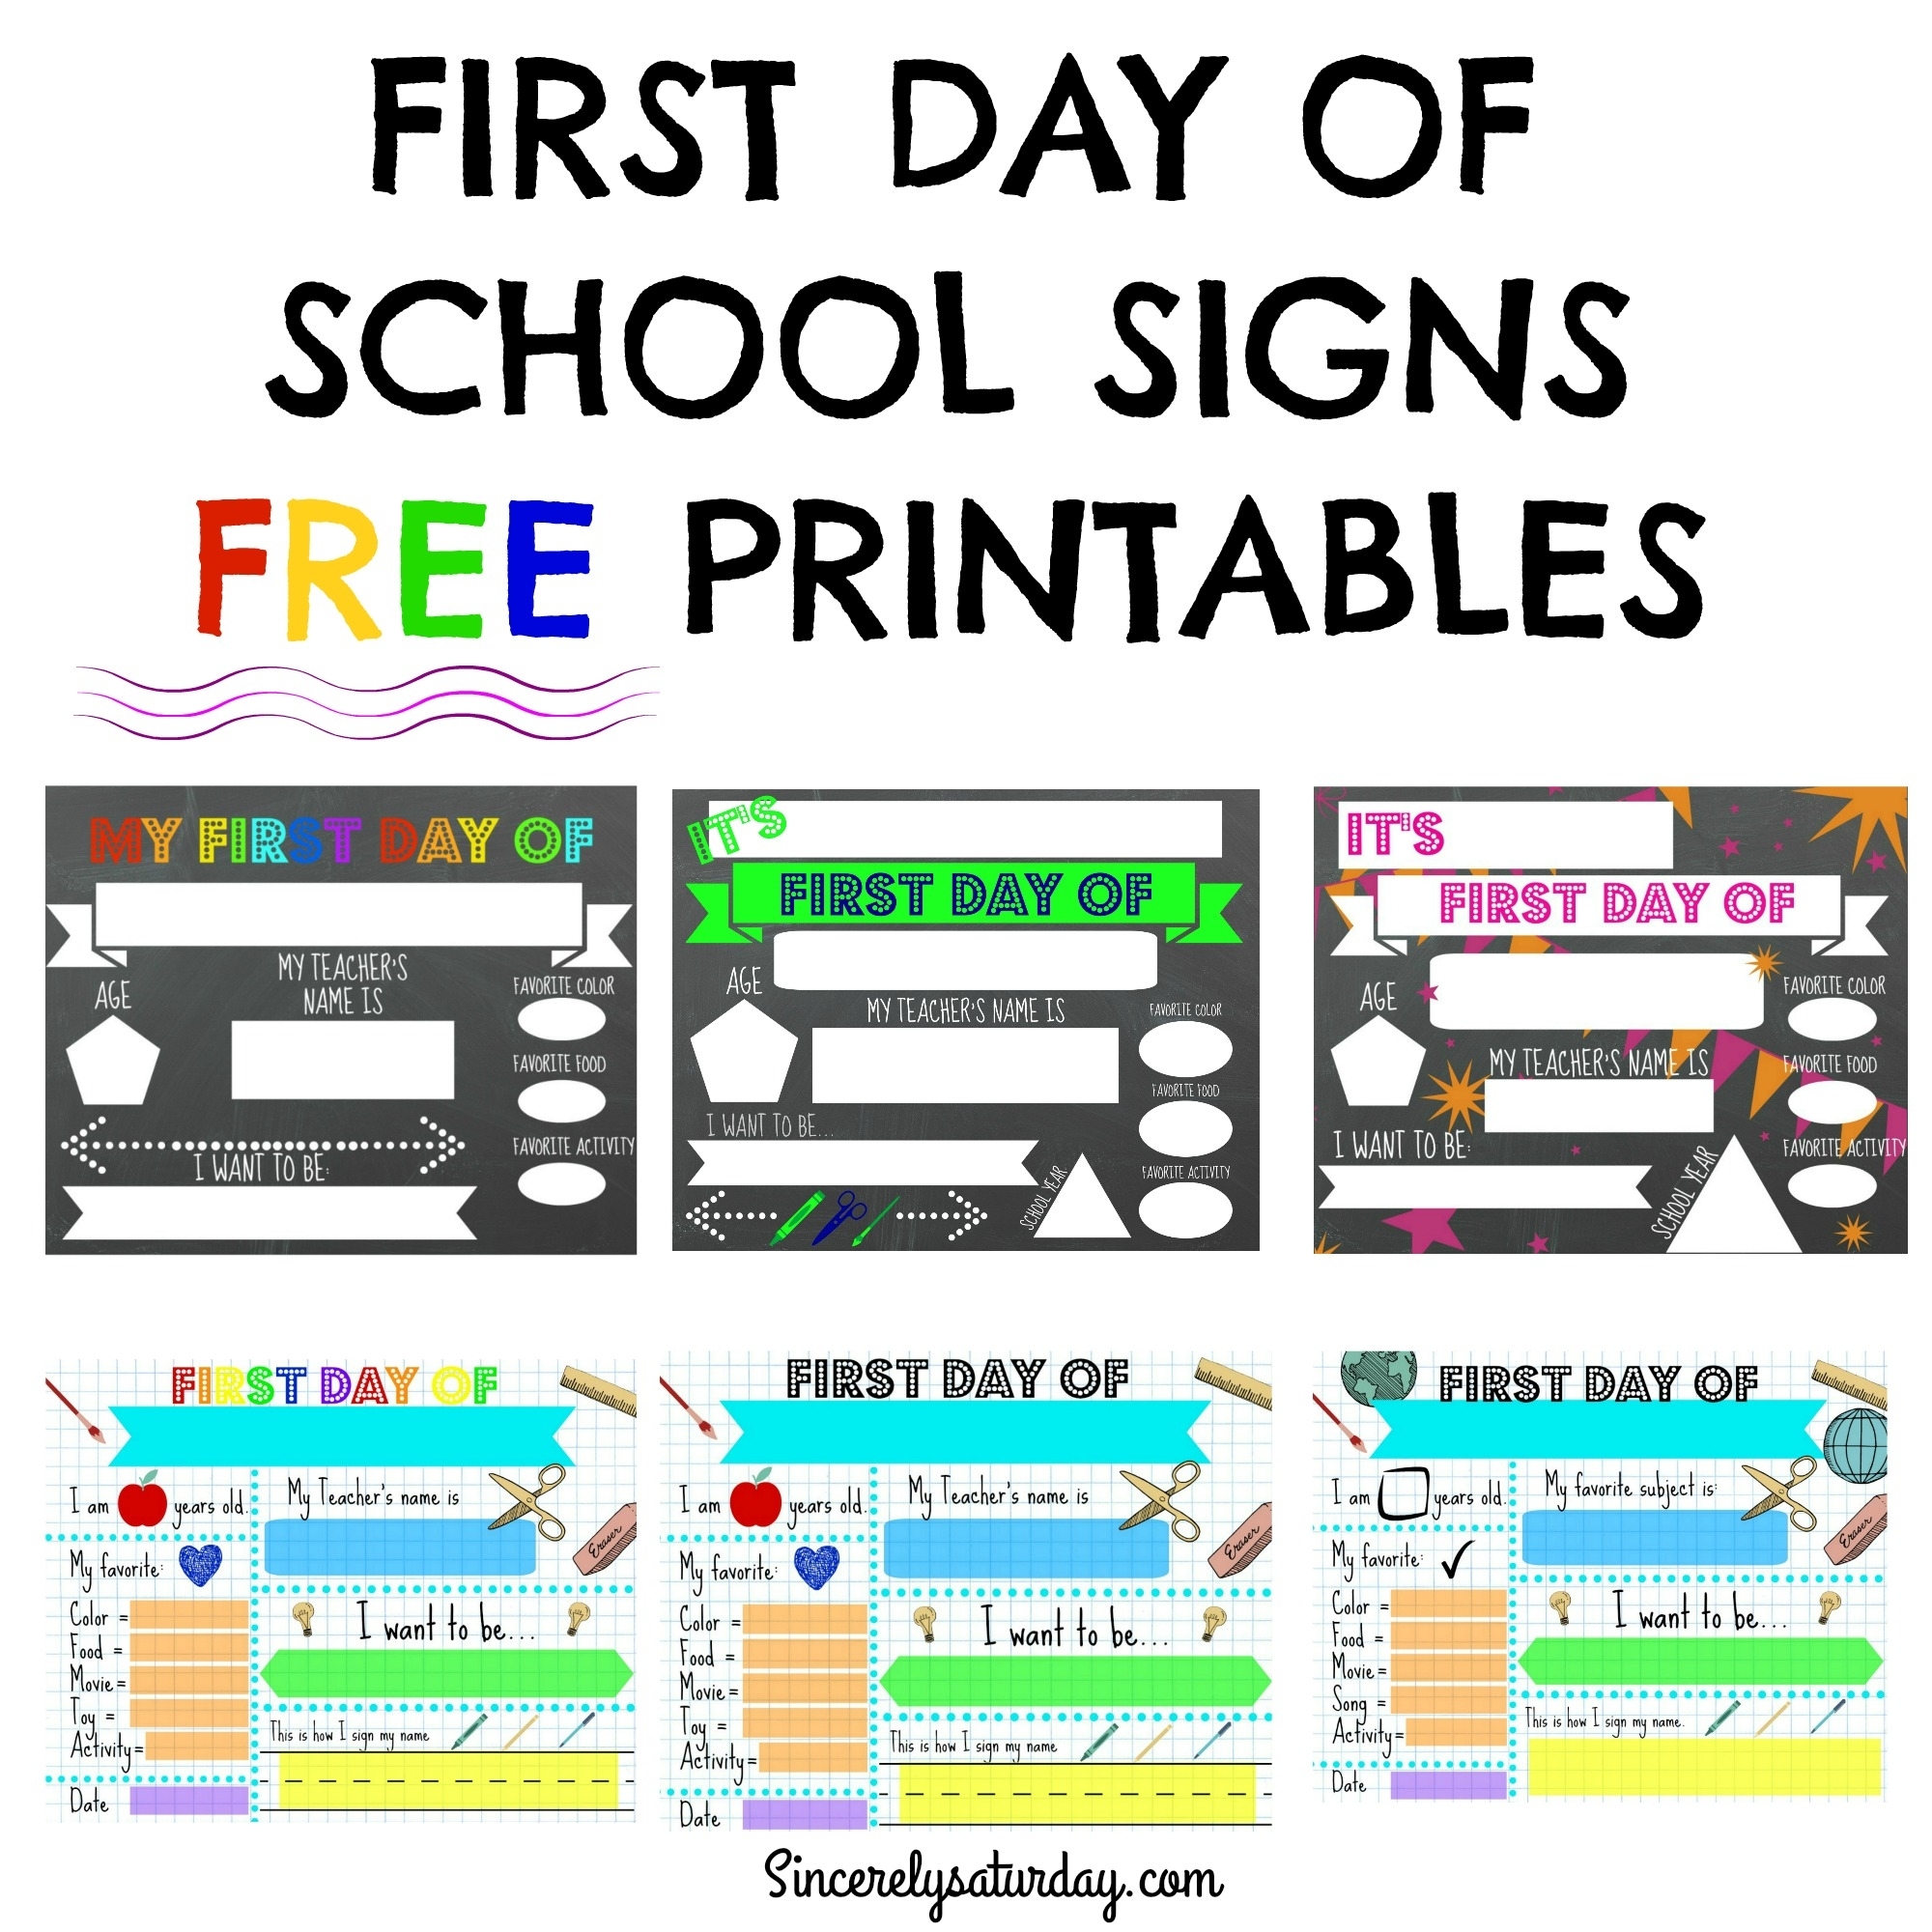 free-printable-first-day-of-school-signs-sincerely-saturday